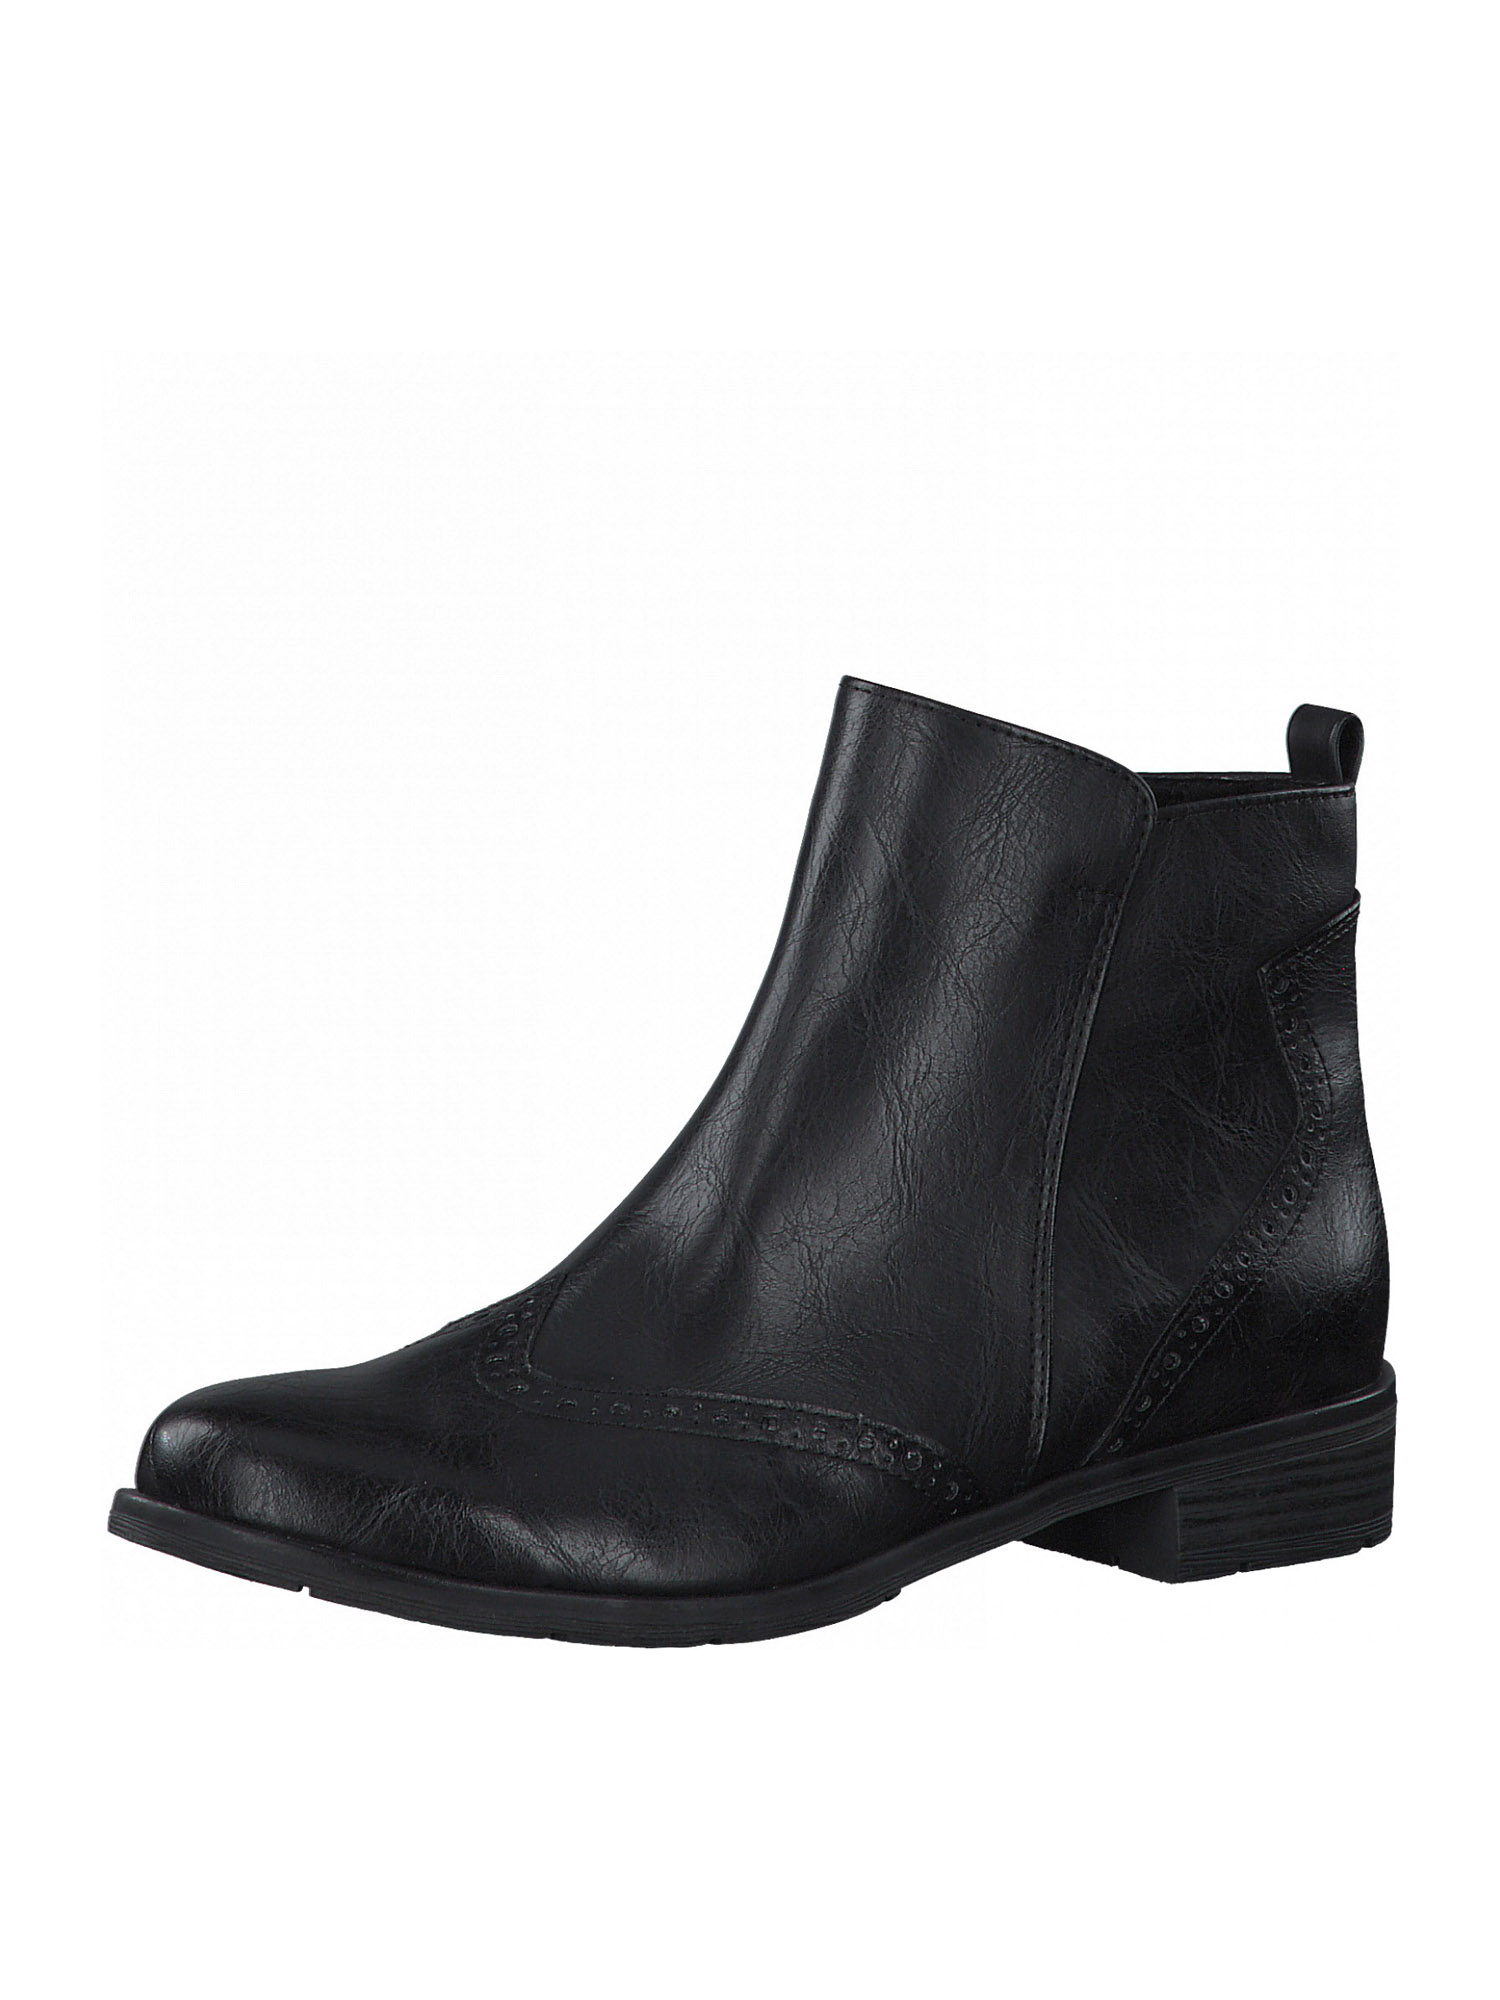 PROMO HdHPC MARCO TOZZI Ankle boots in Nero 